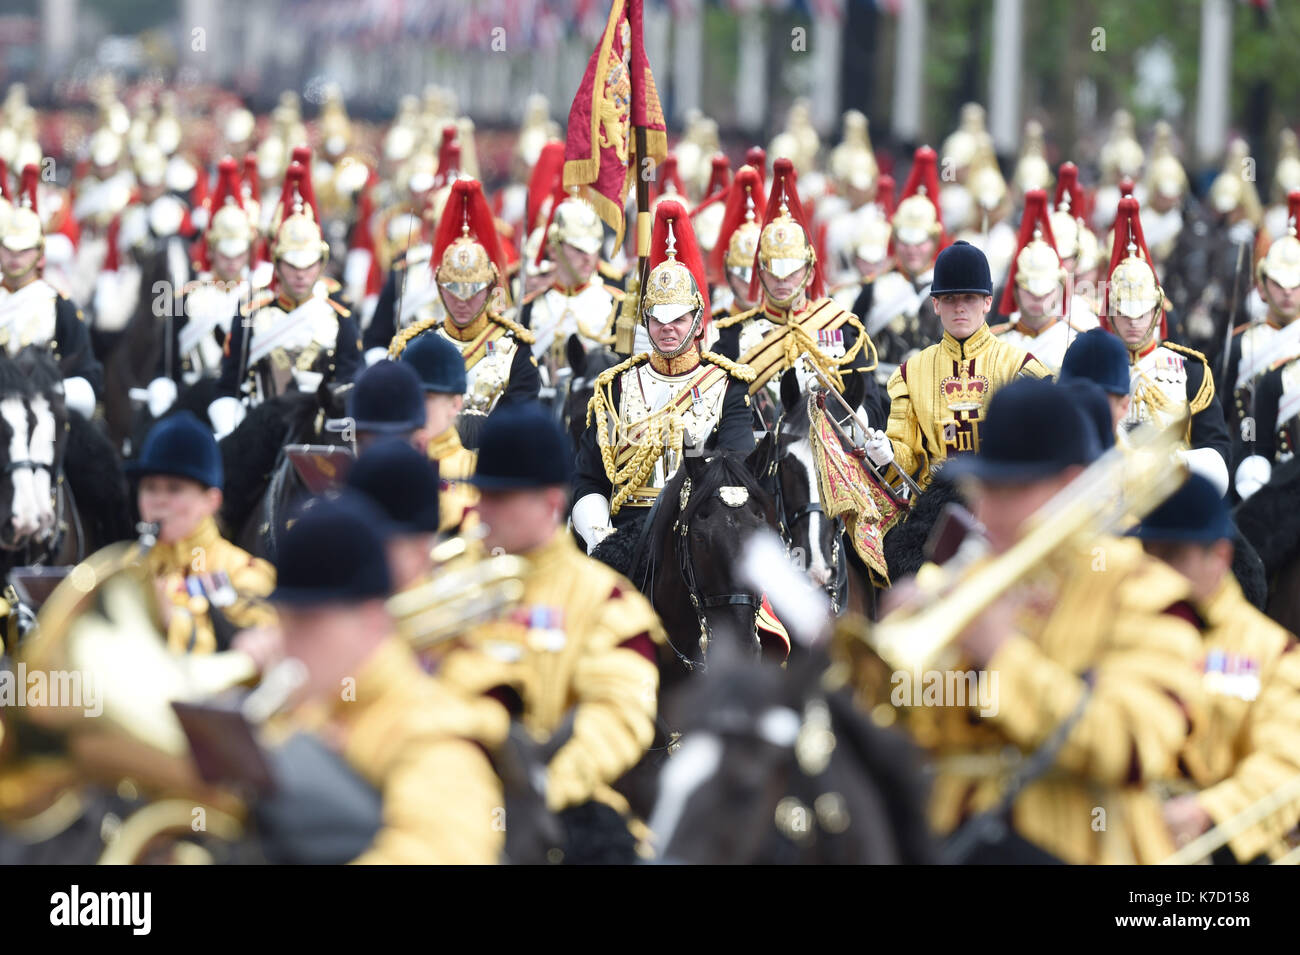 Photo Must Be Credited ©Alpha Press 079965 11/06/2016 Atmosphere in London for Trooping the Colour 2016 during The Queen's 90th Birthday Celebrations. Stock Photo